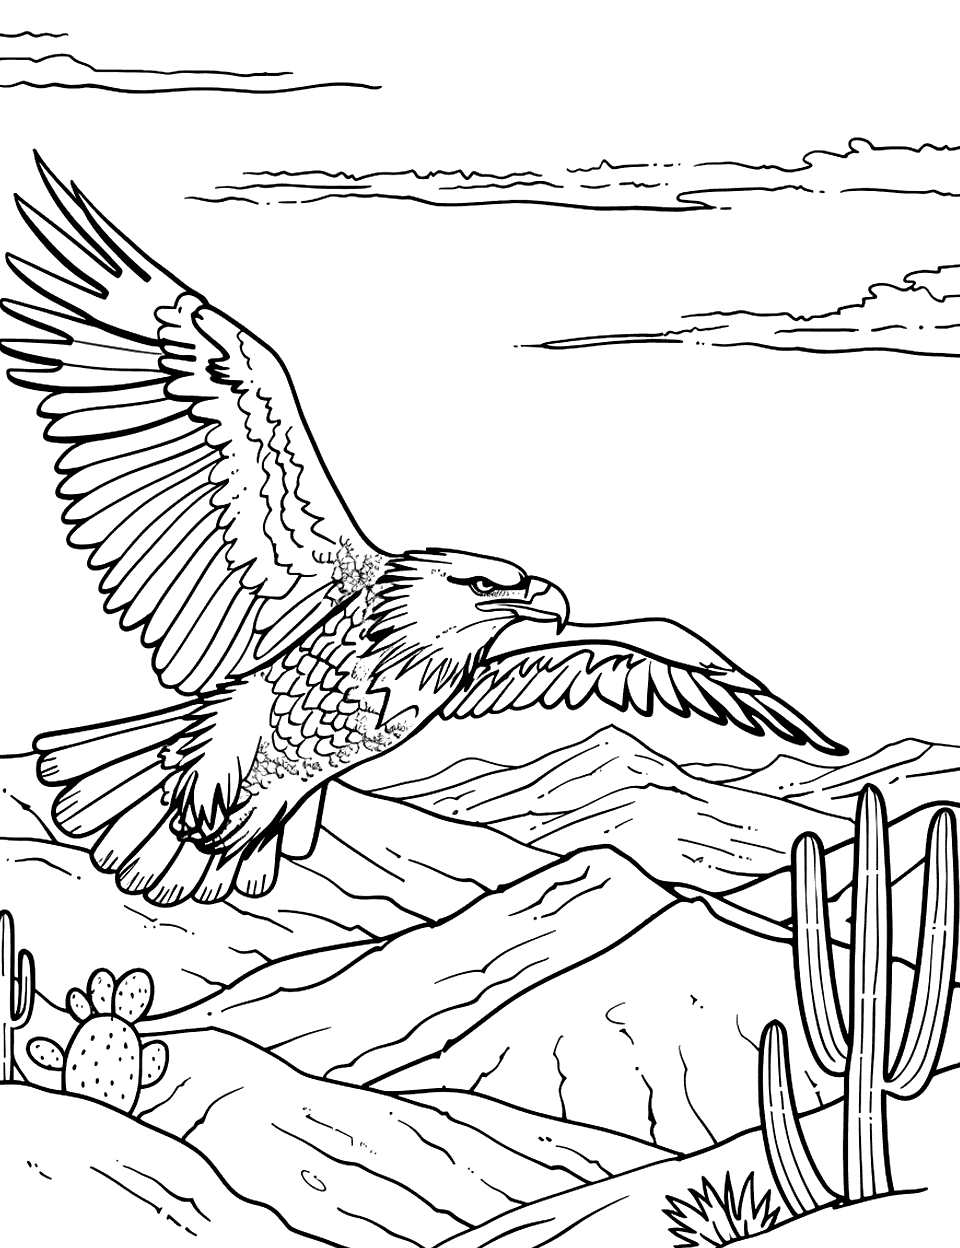 Eagle in a Sparse Desert Coloring Page - An eagle glides low over a desert with cacti and minimal rocks dotting the landscape.